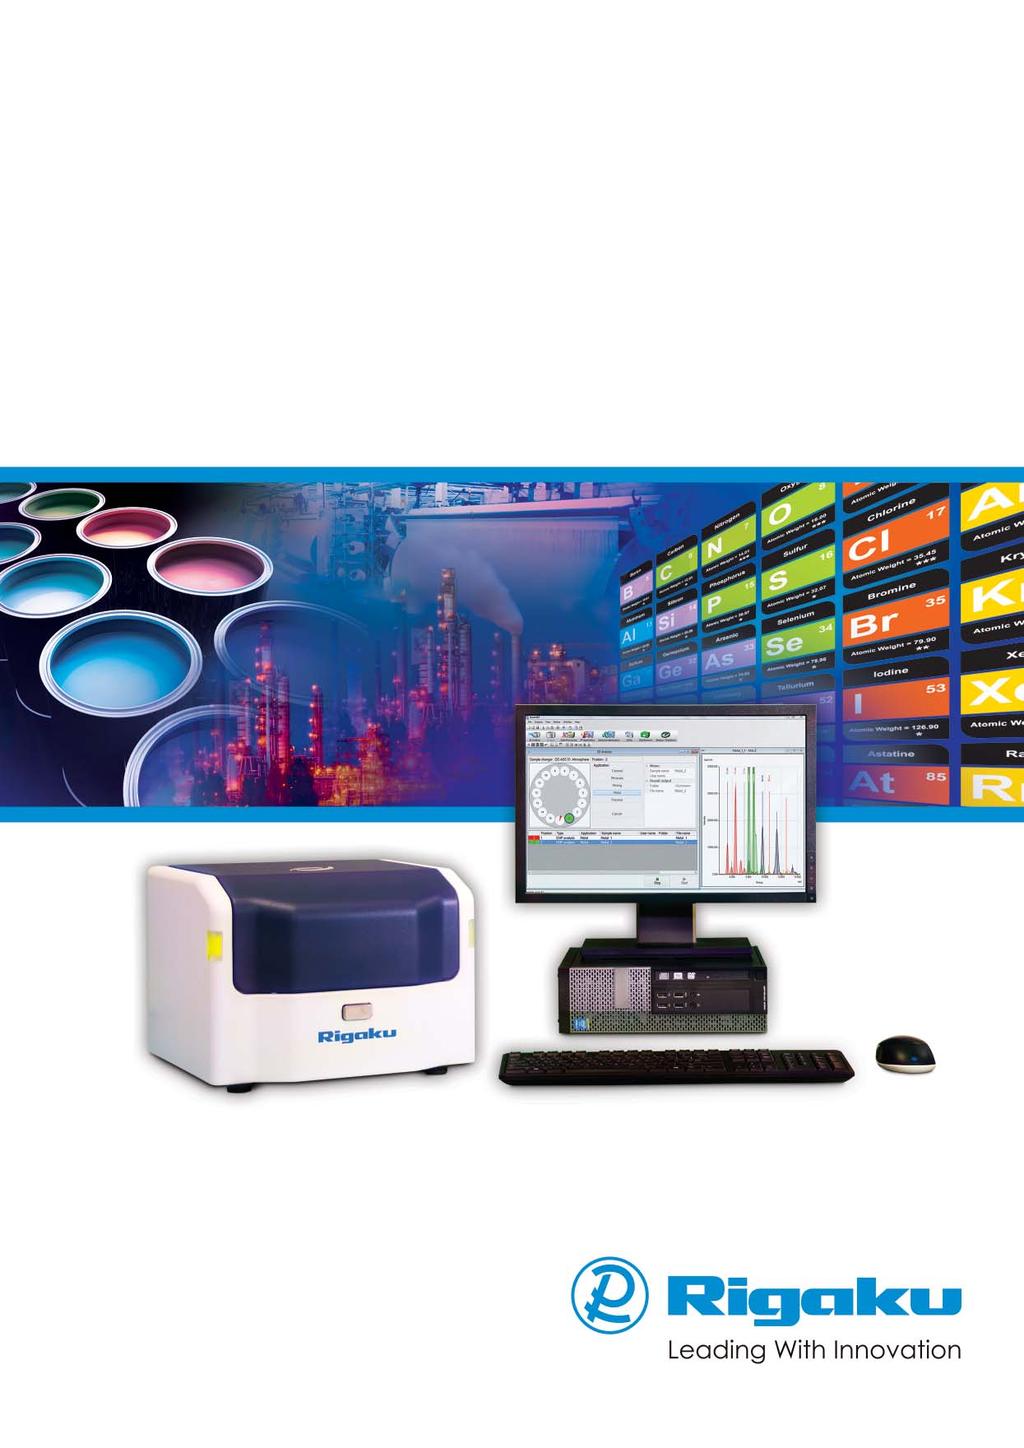 Elemental analysis by X-ray fluorescence High performance, direct